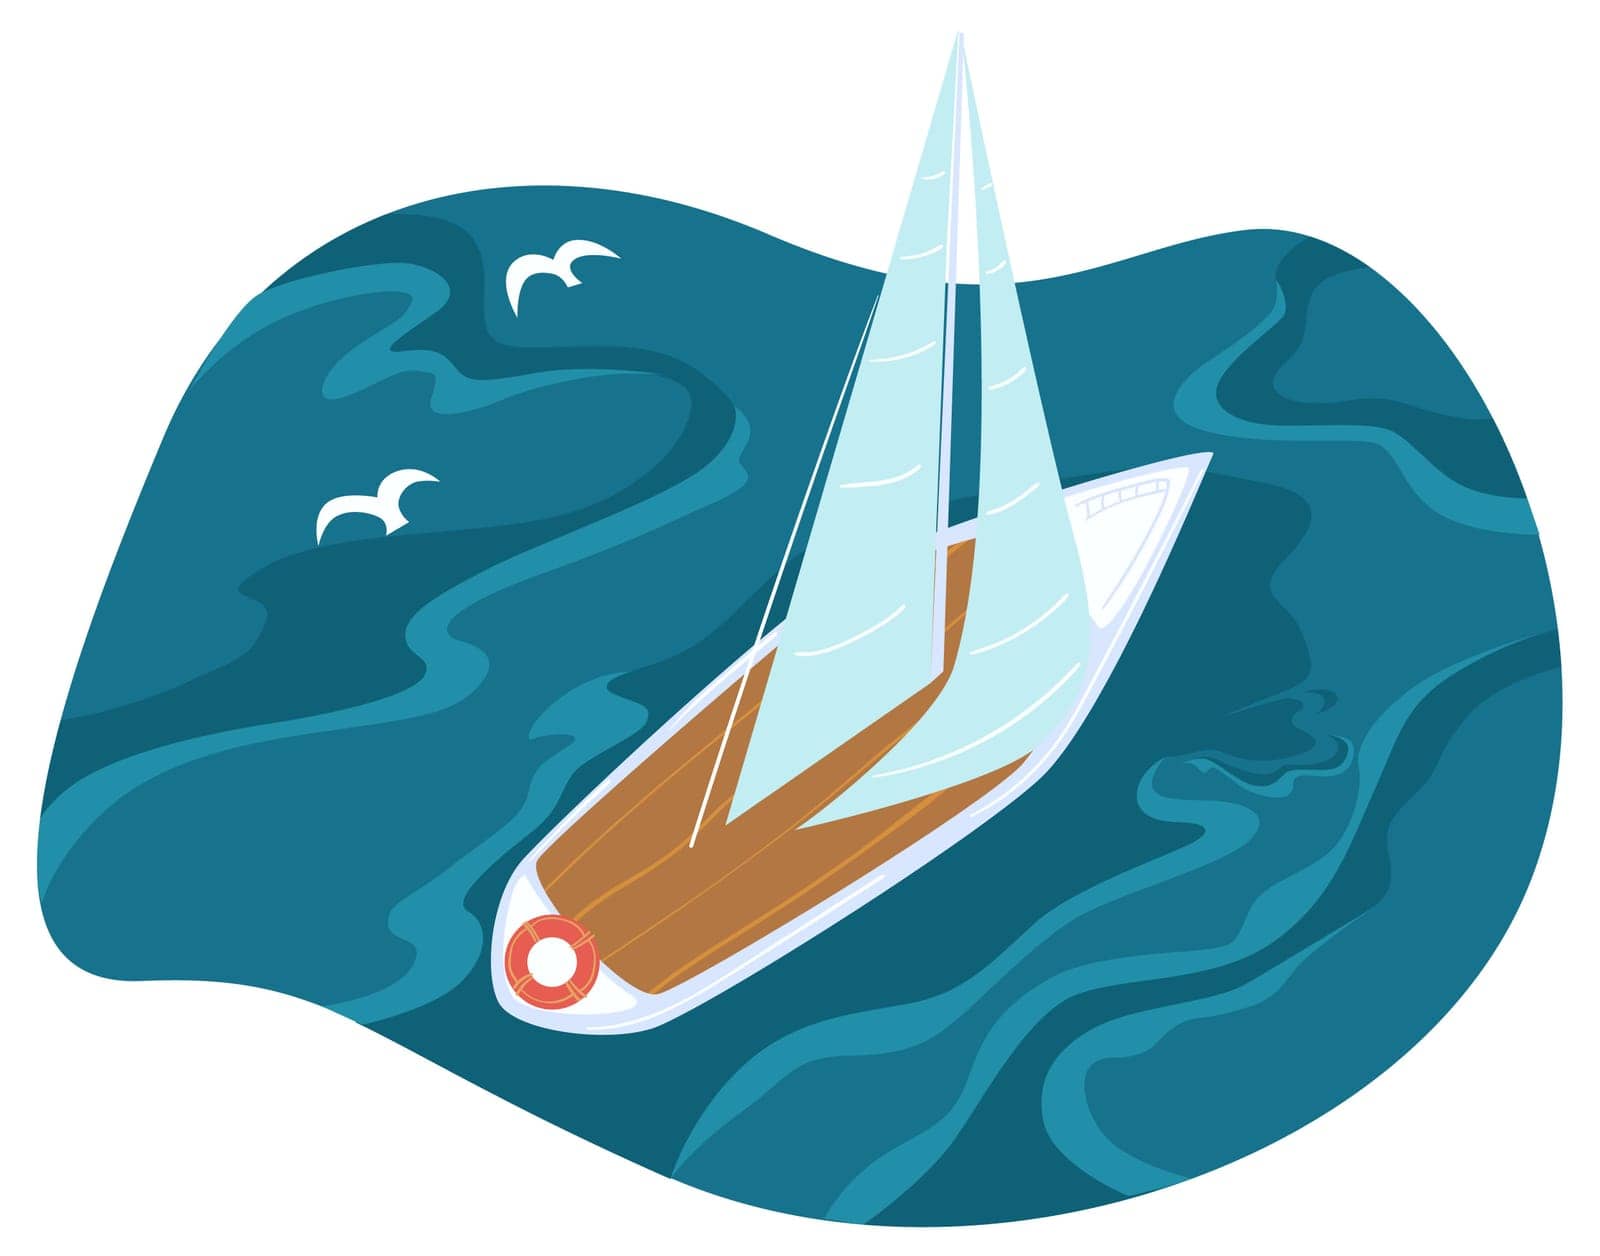 Yacht or cruise ship, sailboat with wooden deck and sails. Isolated vessel with lifebuoy, summer vacations and rest by seaside, sea or ocean journey by water. Flying birds. Vector in flat style